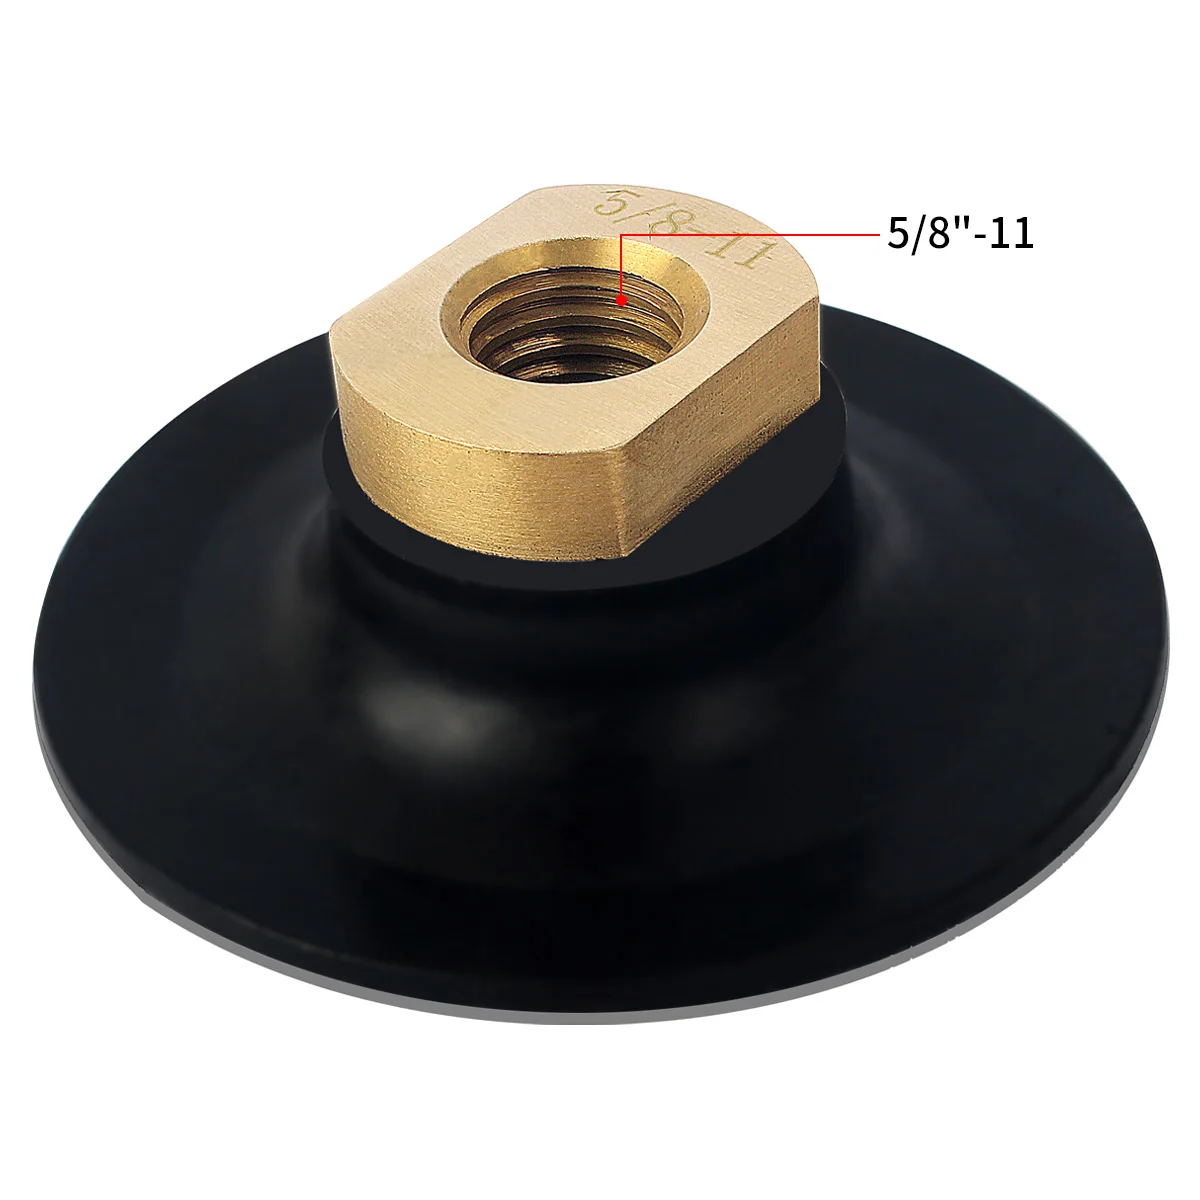 

BSRTTOOL 3"/4"/5" Back Pads For Diamond Polishing Pads M14 5/8-11 Threads For Angle Grinder Rubber Based Disc Holders